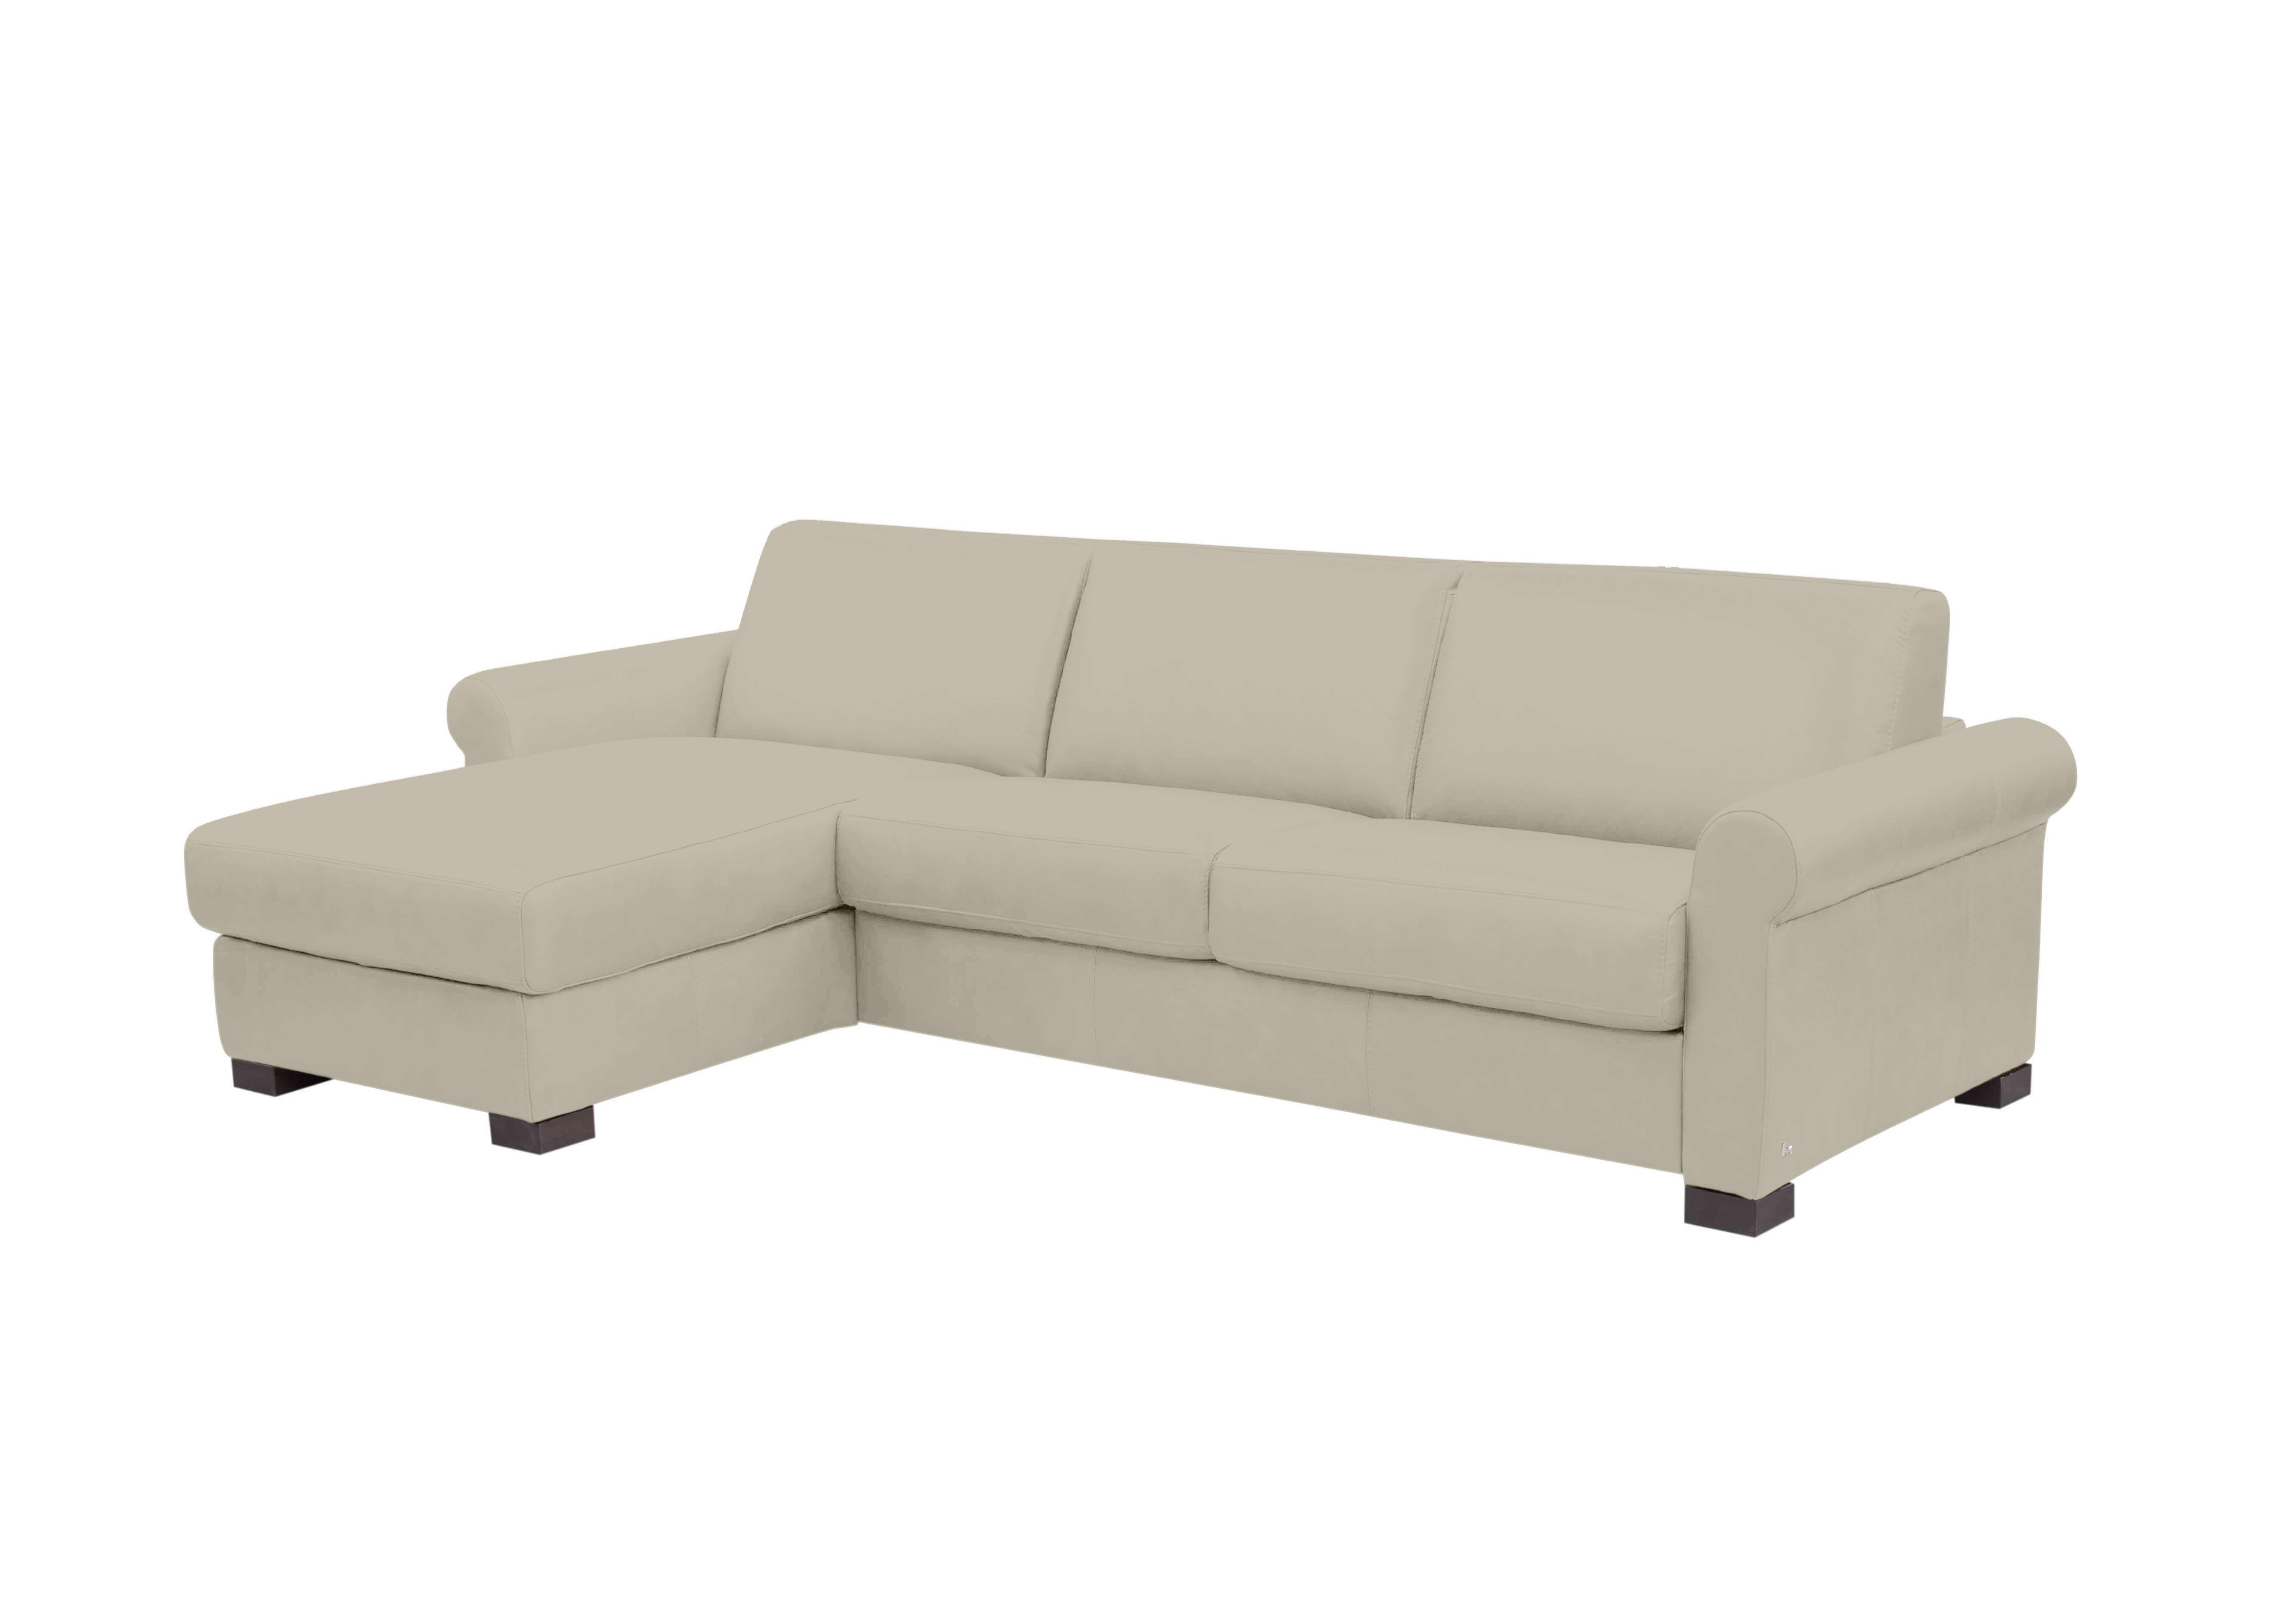 Alcova 3 Seater Leather Sofa Bed with Storage Chaise with Scroll Arms in Torello Tortora 328 on Furniture Village